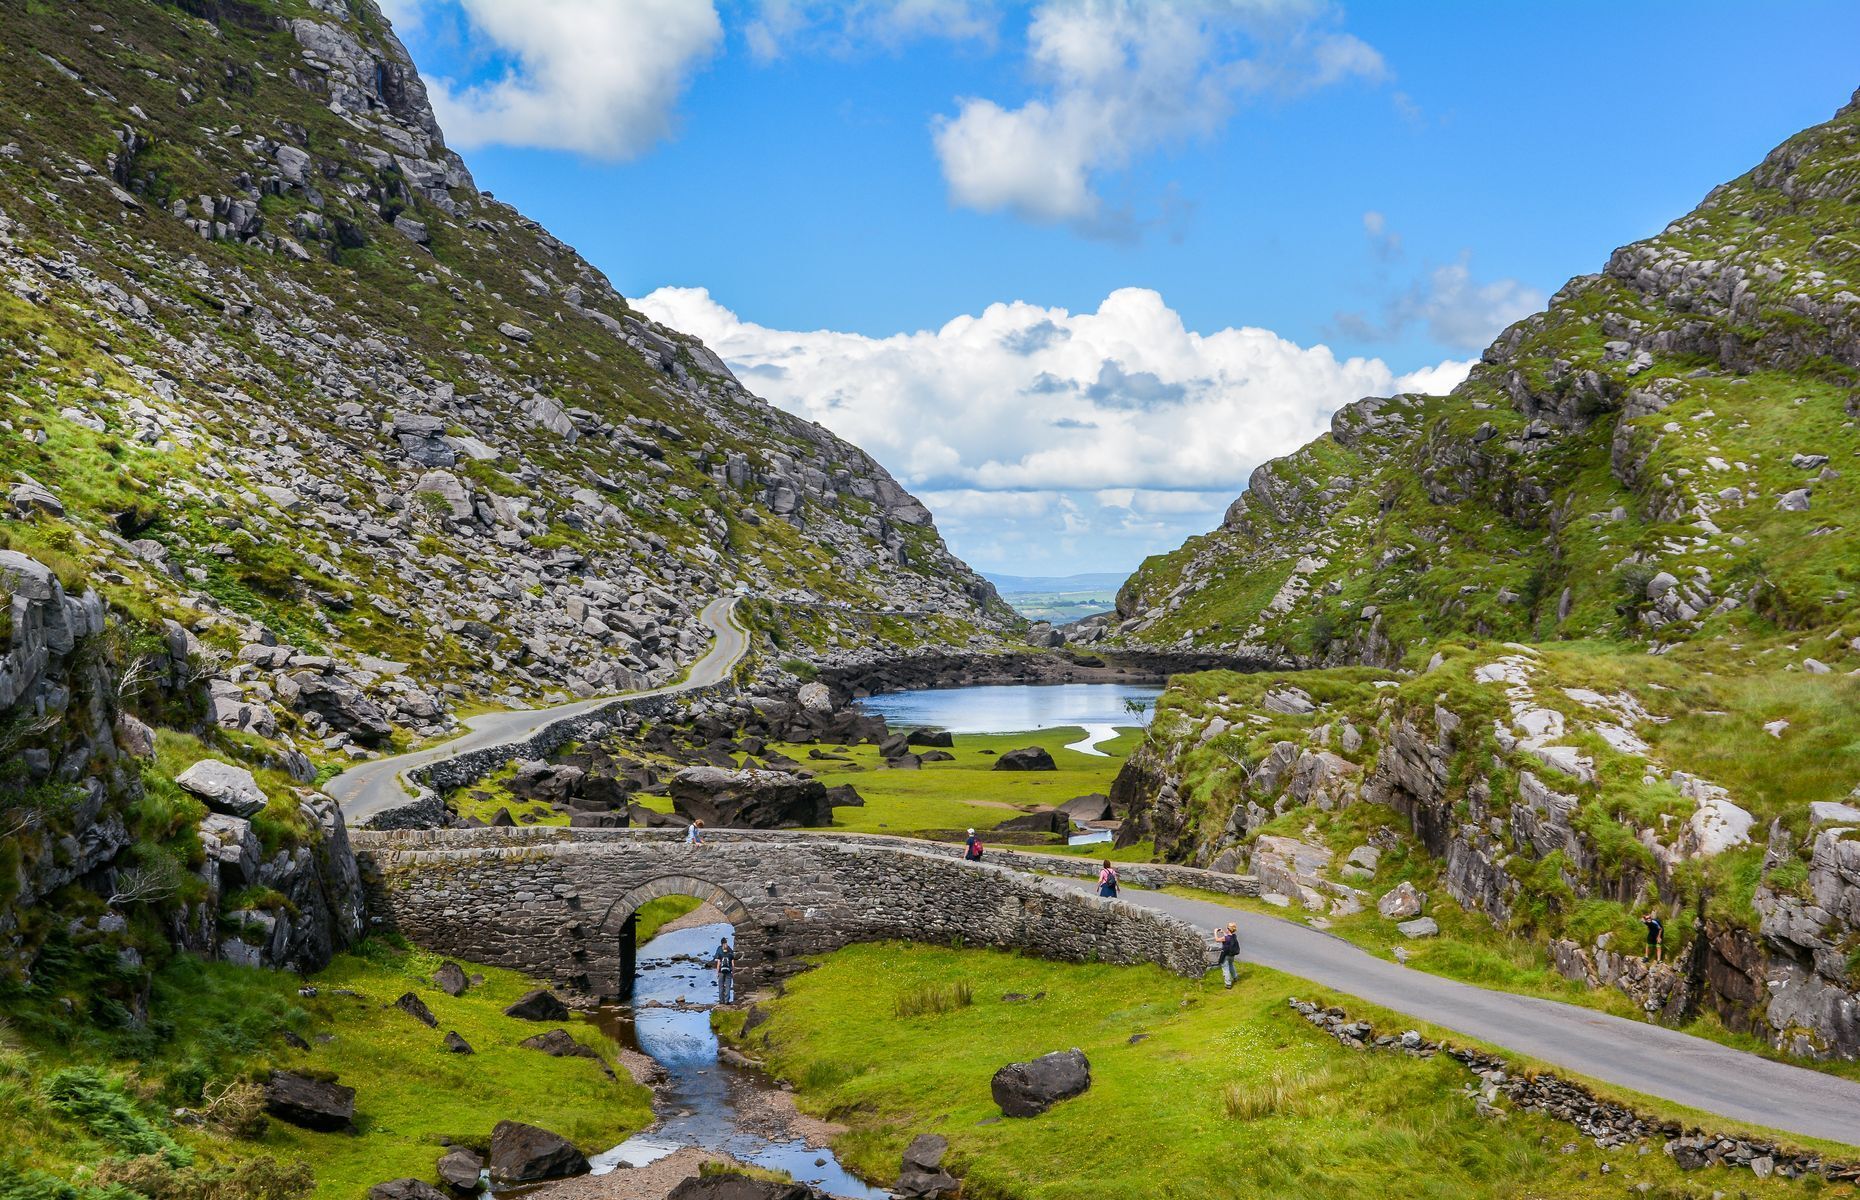 <p>If you like road trips, the <a href="https://www.ireland.com/en-us/destinations/regions/ring-of-kerry/" rel="noreferrer noopener">Ring of Kerry</a> is one of Ireland’s most spectacular driving routes. County Kerry is also home to the famous <a href="https://www.guide-ireland.com/tourist-attractions/gap-of-dunloe/" rel="noreferrer noopener">Gap of </a><a href="https://www.guide-ireland.com/tourist-attractions/gap-of-dunloe/" rel="noreferrer noopener">Dunloe</a> and the beautiful Dingle Peninsula. You’ll see lush valleys, white sandy beaches, and breathtaking scenery.</p>